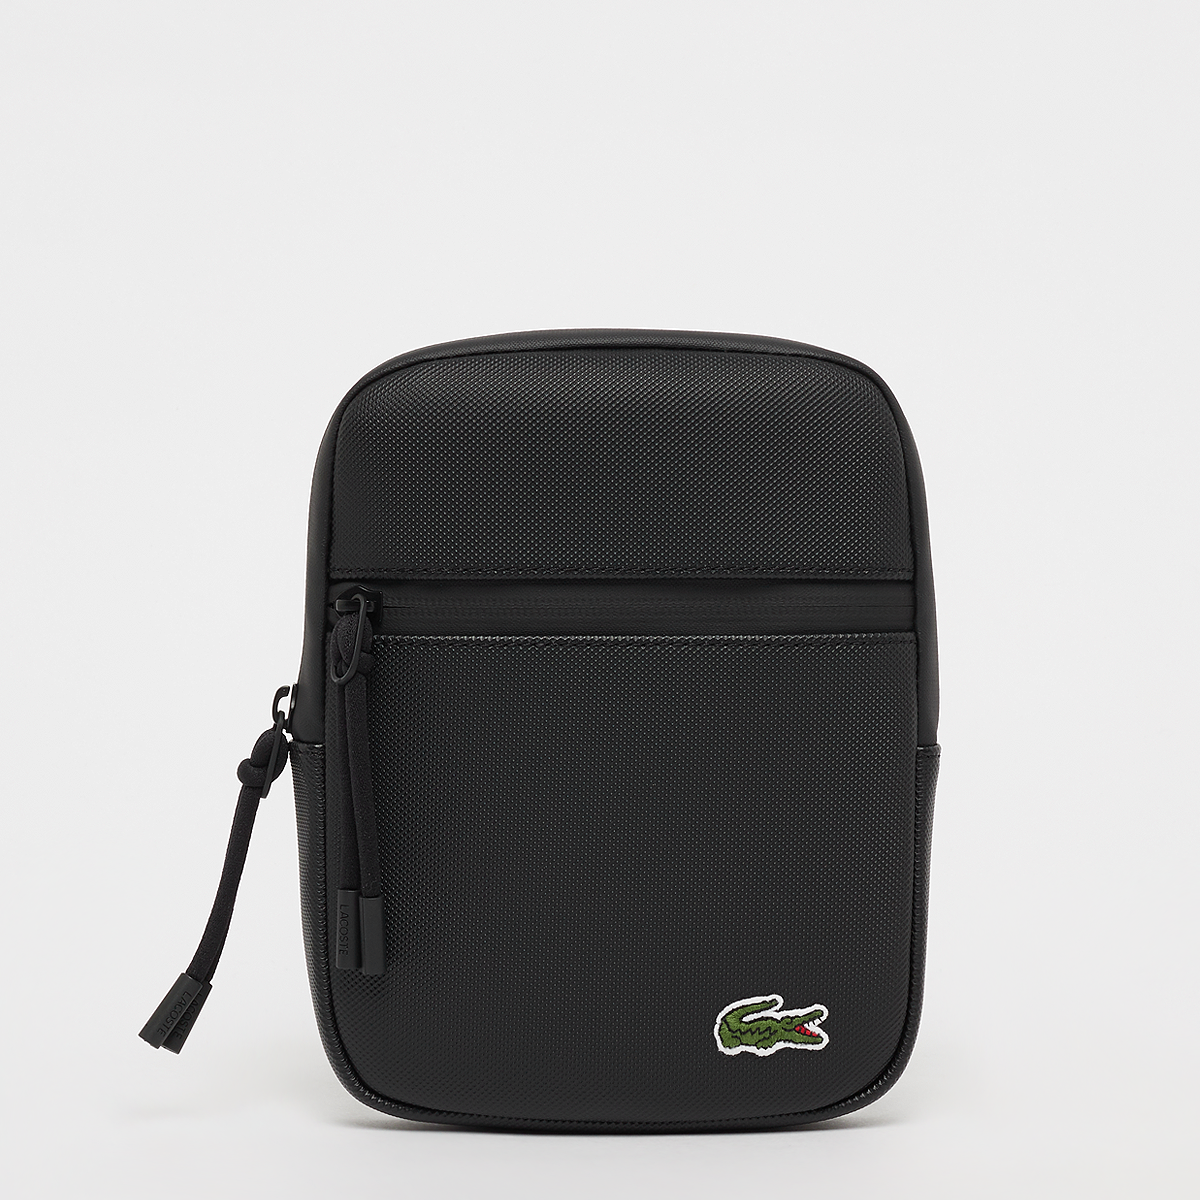 Crossover Bag, Lacoste, Bags, Black, taille: one size